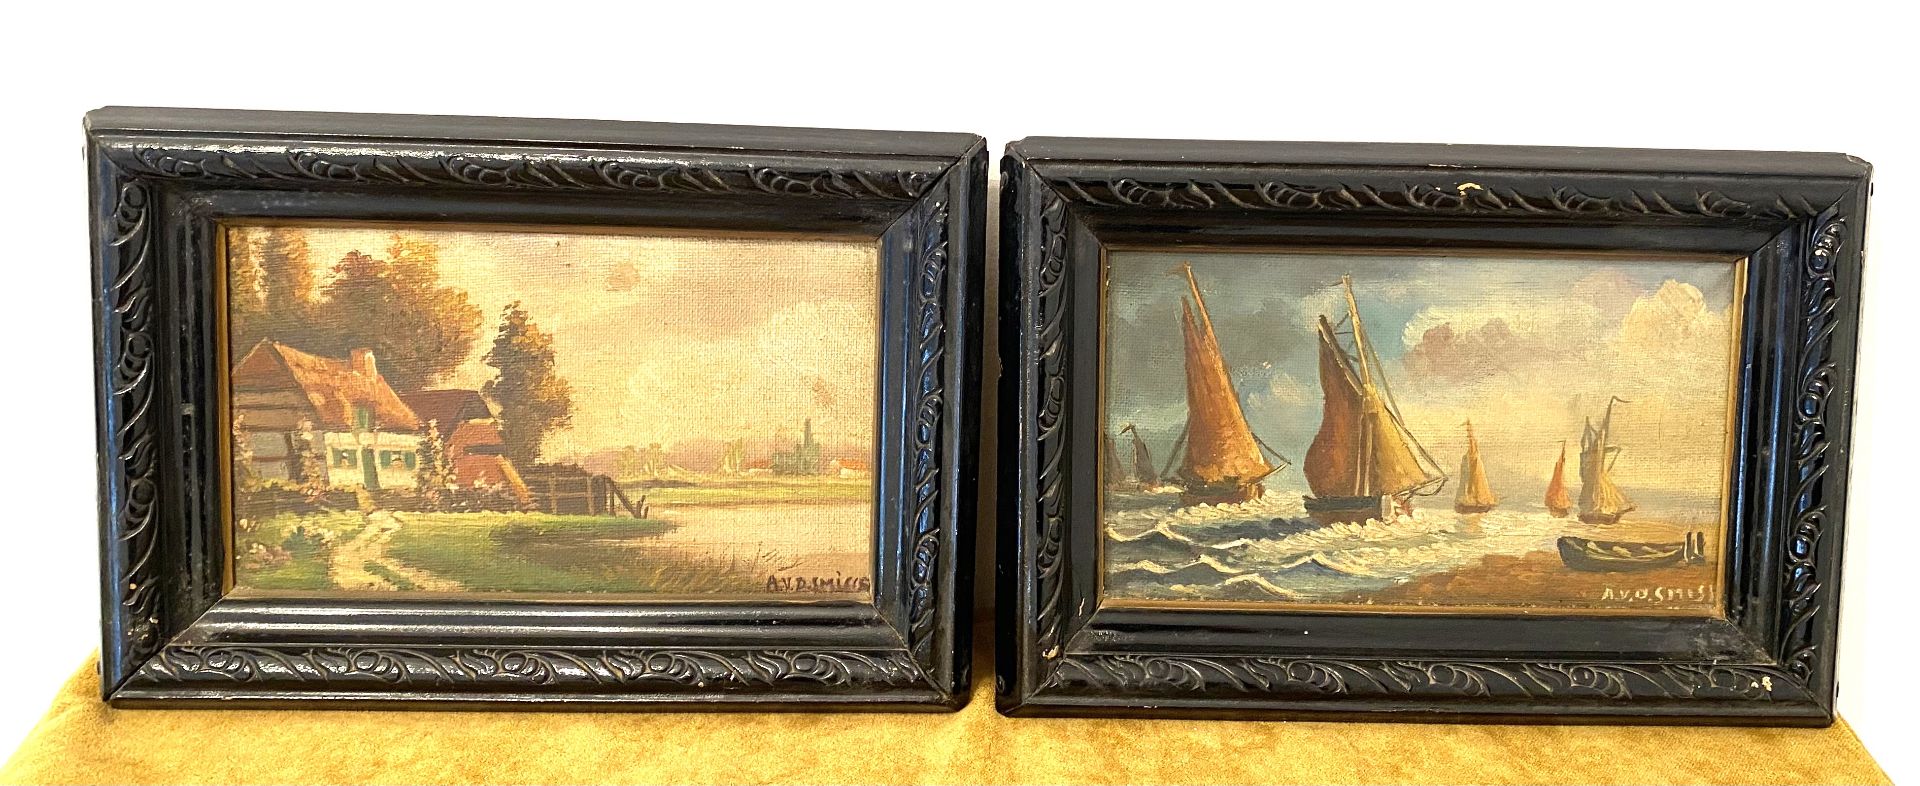 Pair of small Oil on Canvas Signed Van Der Smisse